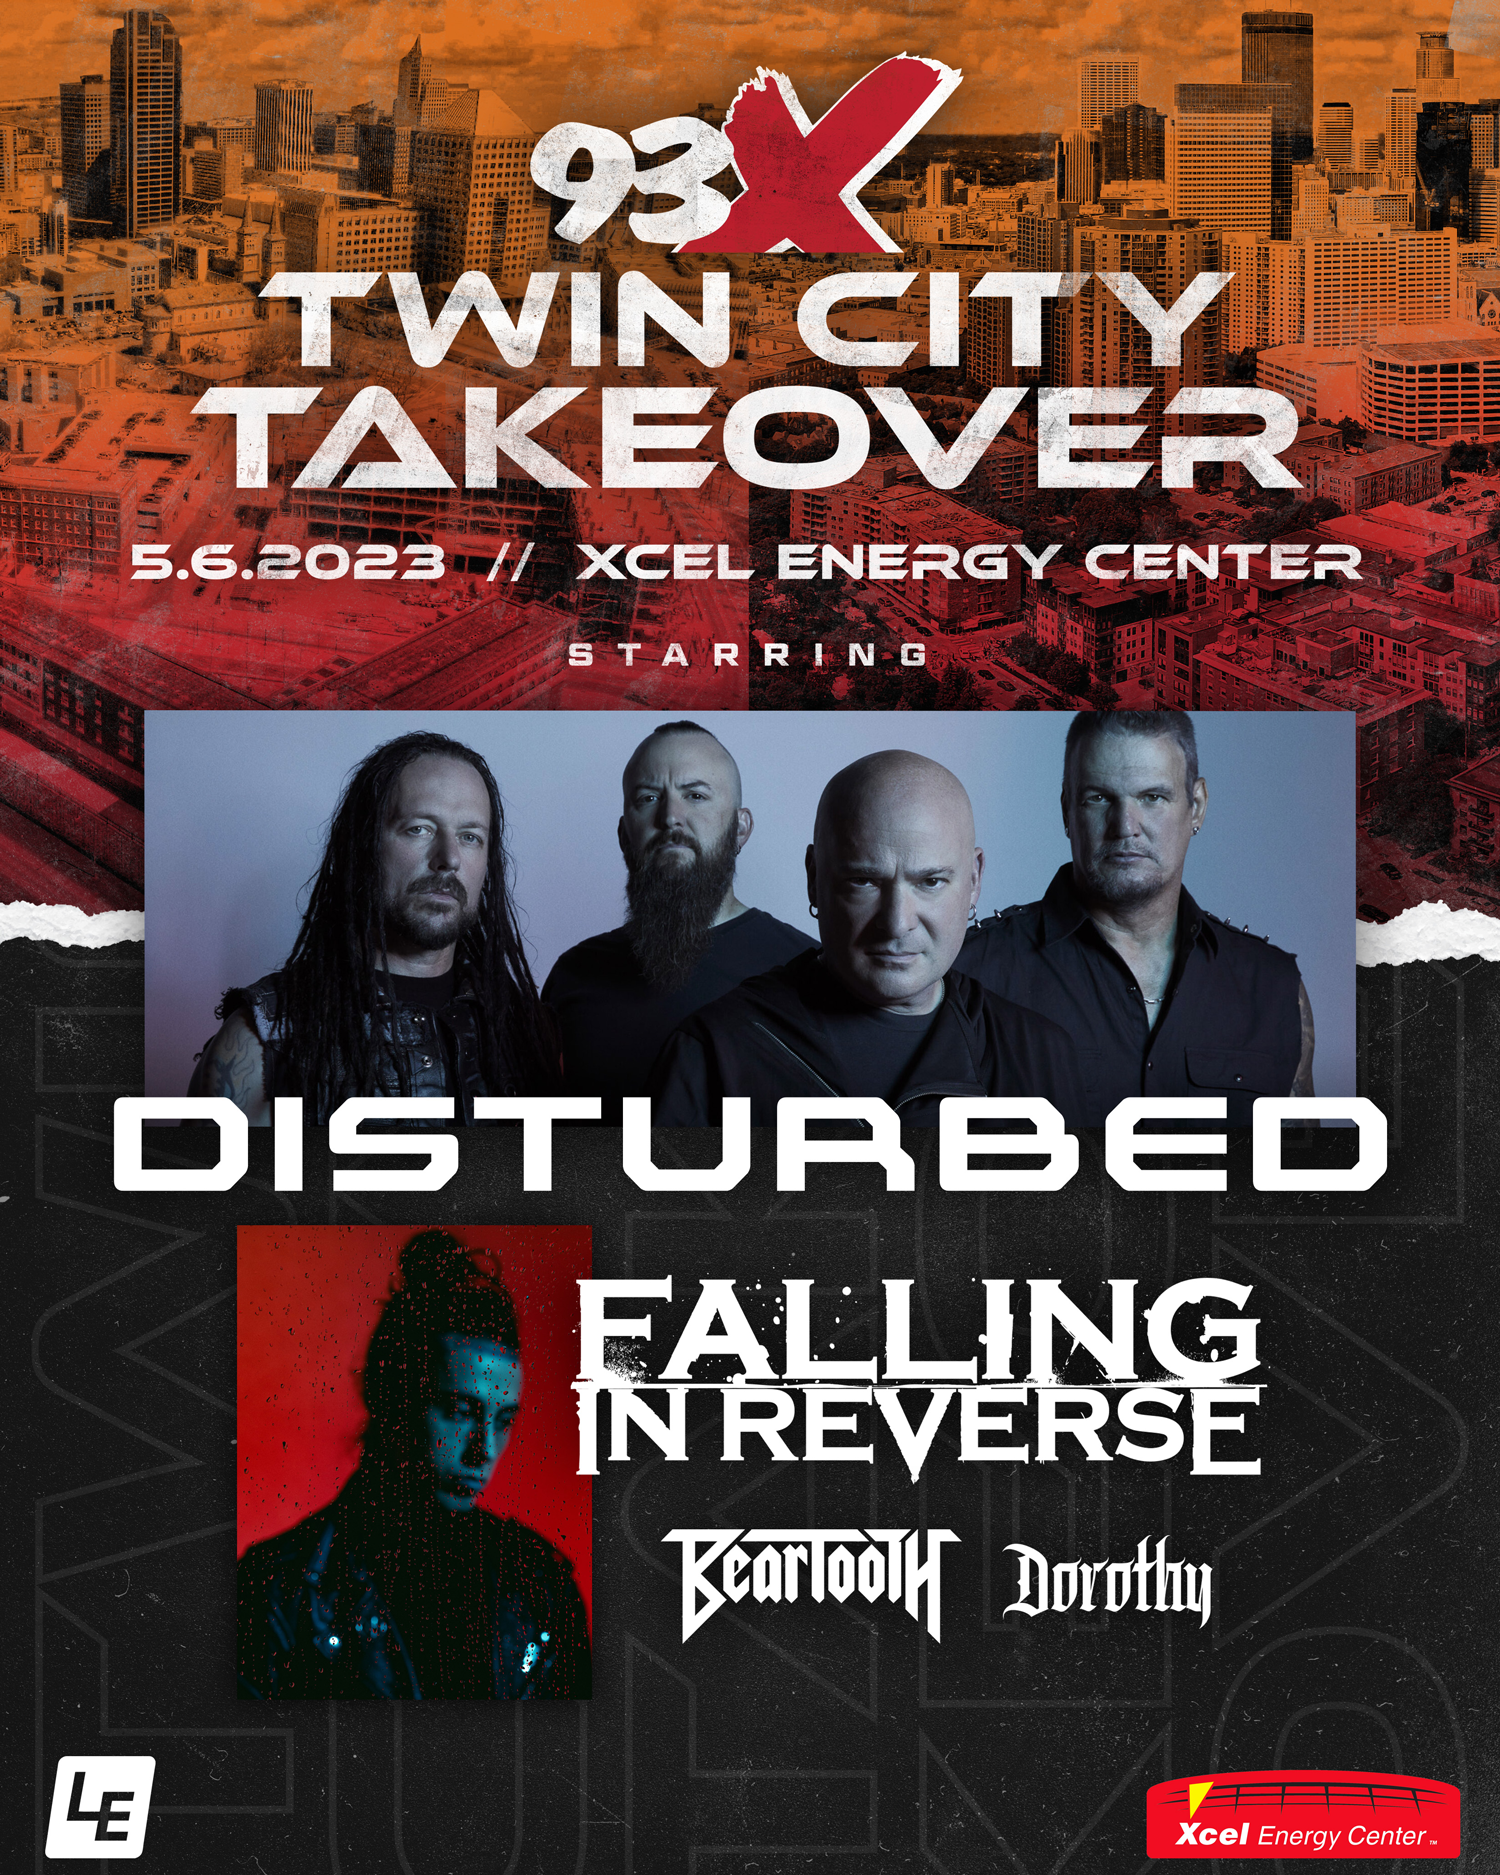 Disturbed headlining Twin City Takeover in St. Paul, MN on May 6, 2023